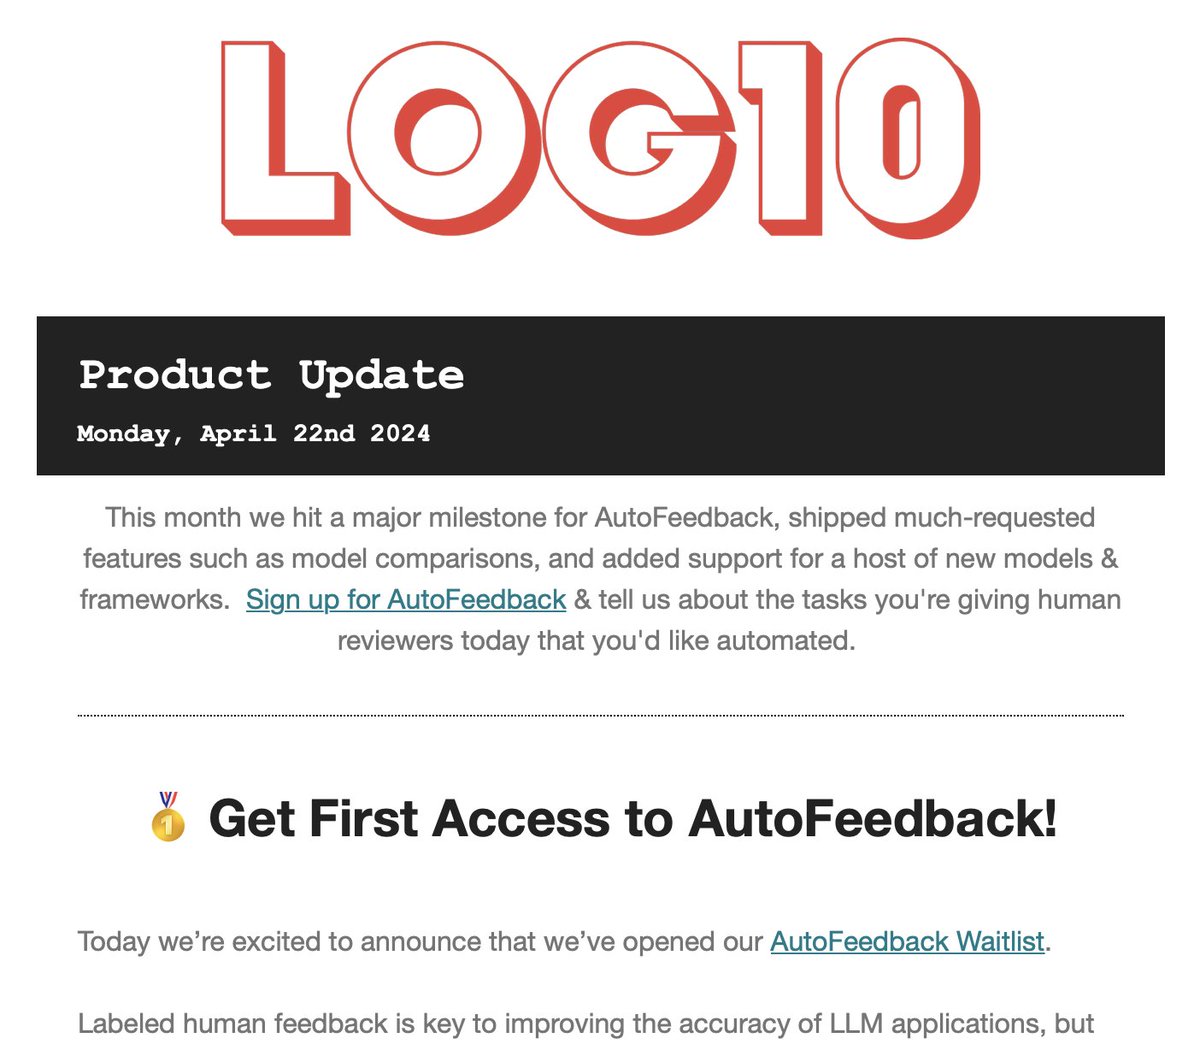 This month we hit a 🏆 major milestone for AutoFeedback, shipped 🔥 hot features like model comparisons, and added 🔩 support for new models & frameworks. Read all the details in our Product Update: mailchi.mp/log10/get_firs… #LLMs #LLMOps